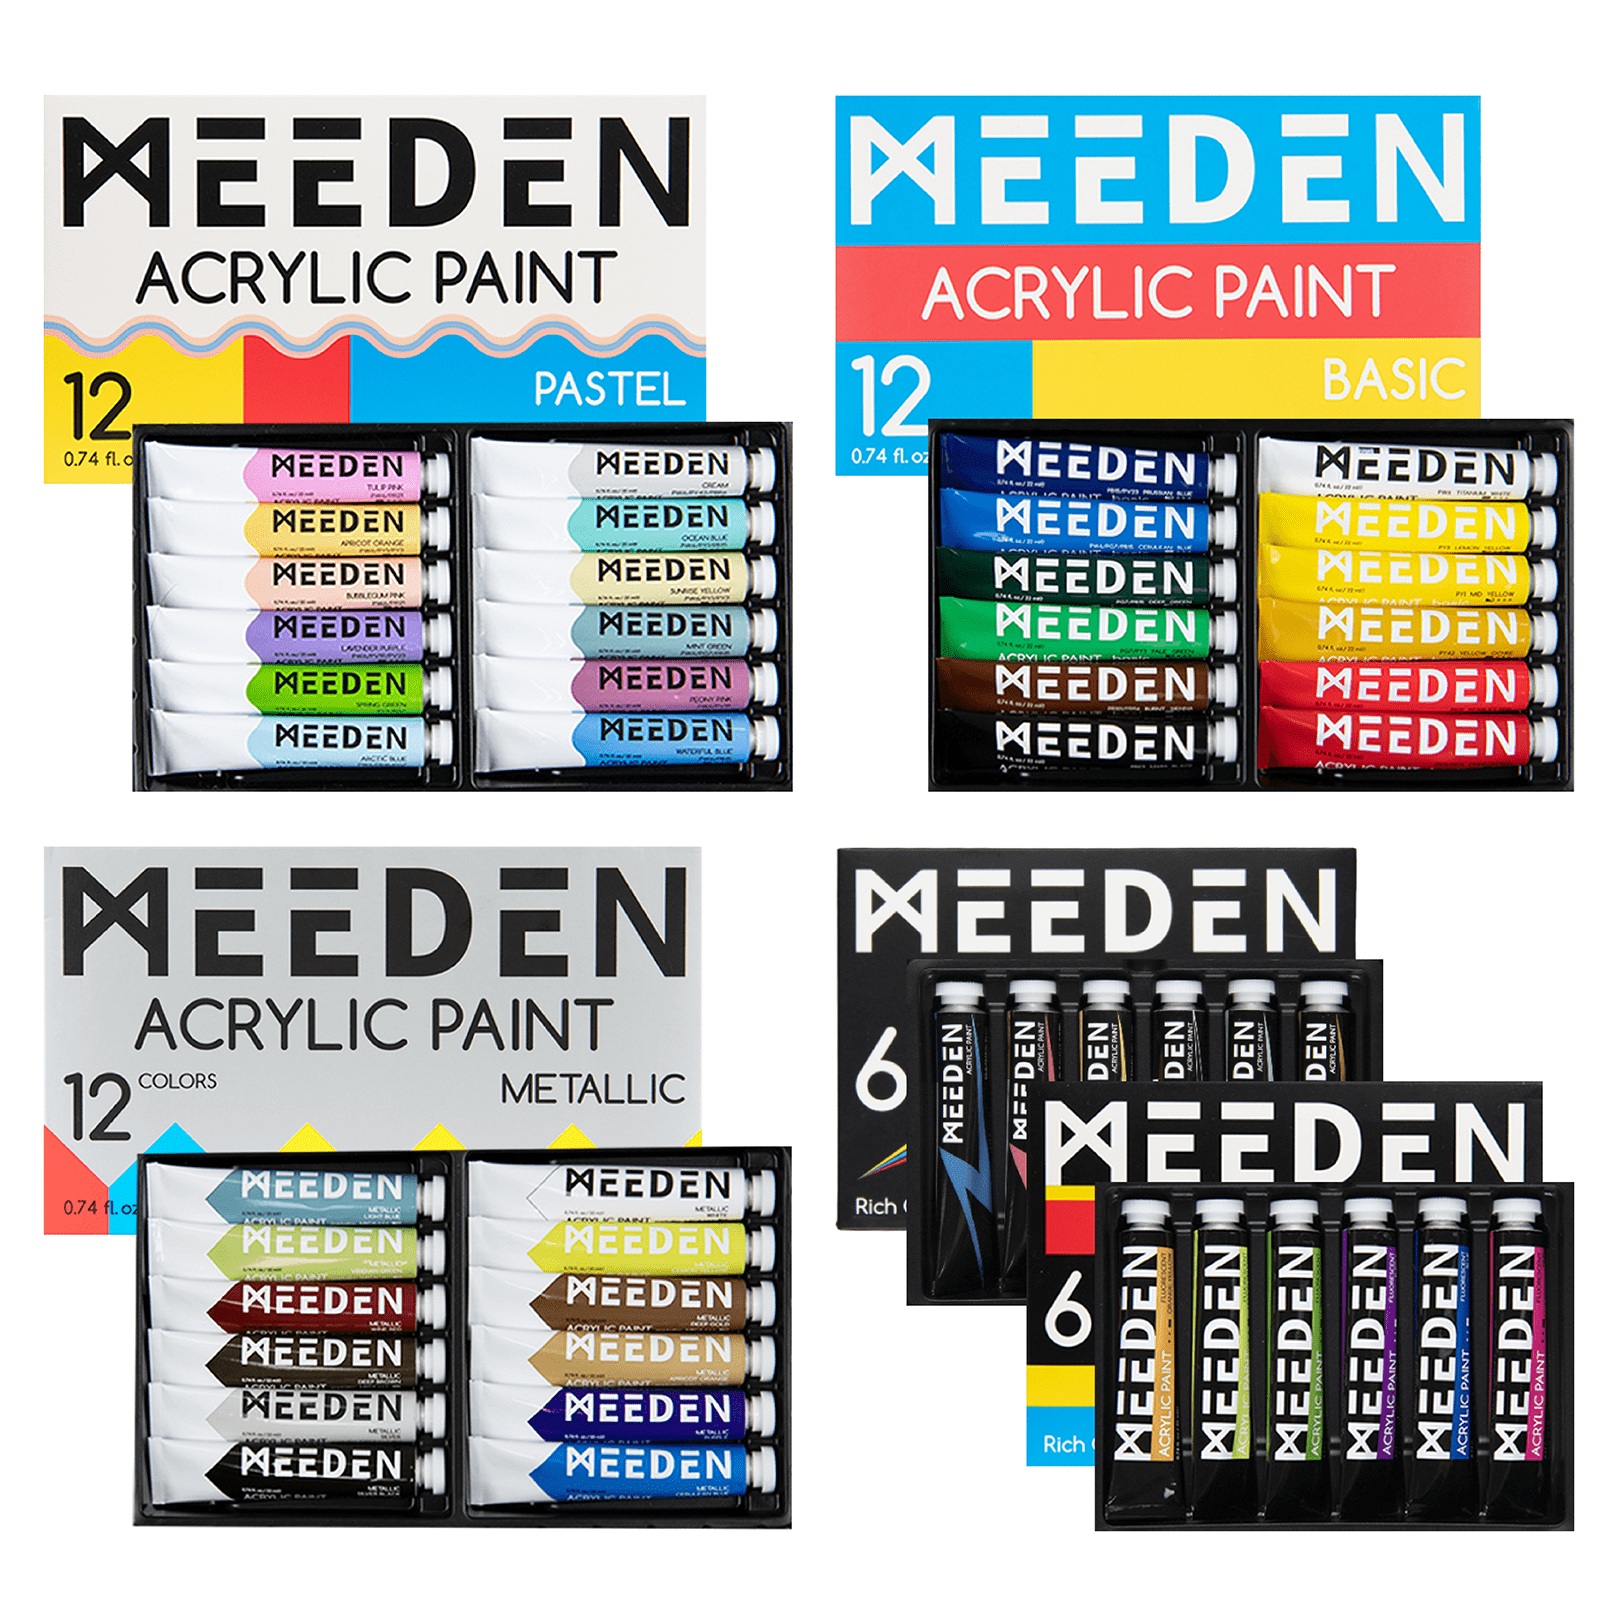 MEEDEN Acrylic Paint Set of 48 Colors/Tubes (22ml/0.74 oz.) Non Toxic Rich  Pigments Colors Great for Artist Student, Hobby